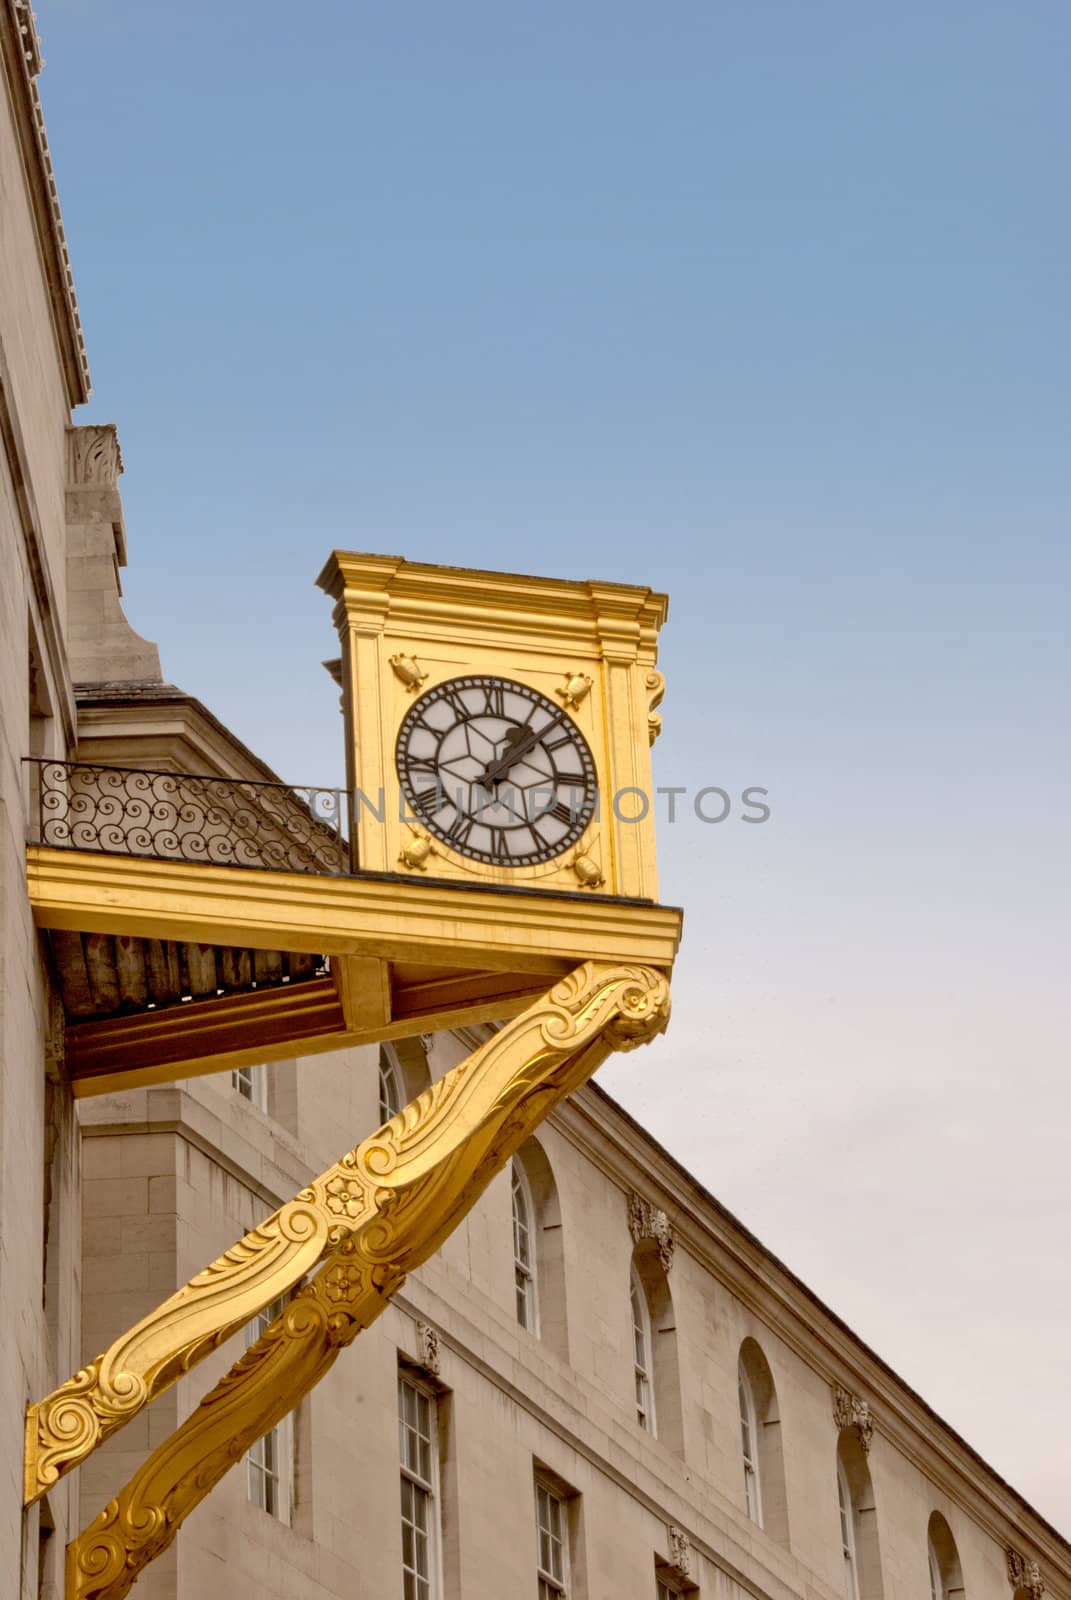 Gold Clock by d40xboy